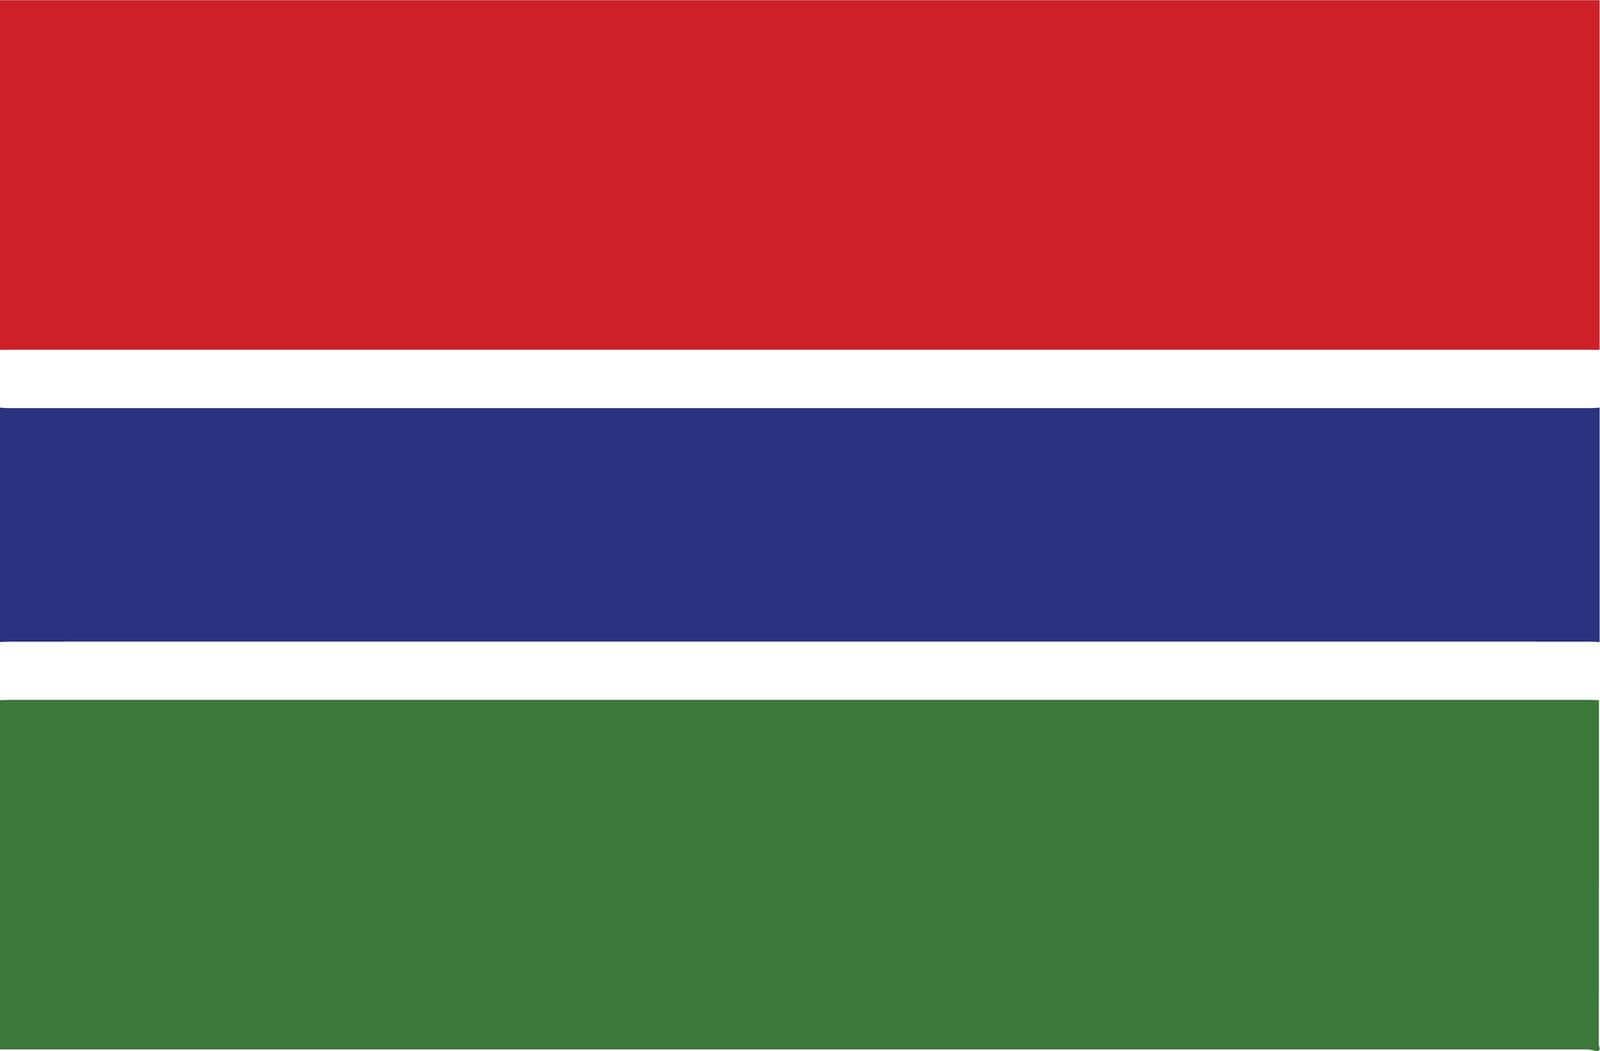 The flag of the African country of Gambia